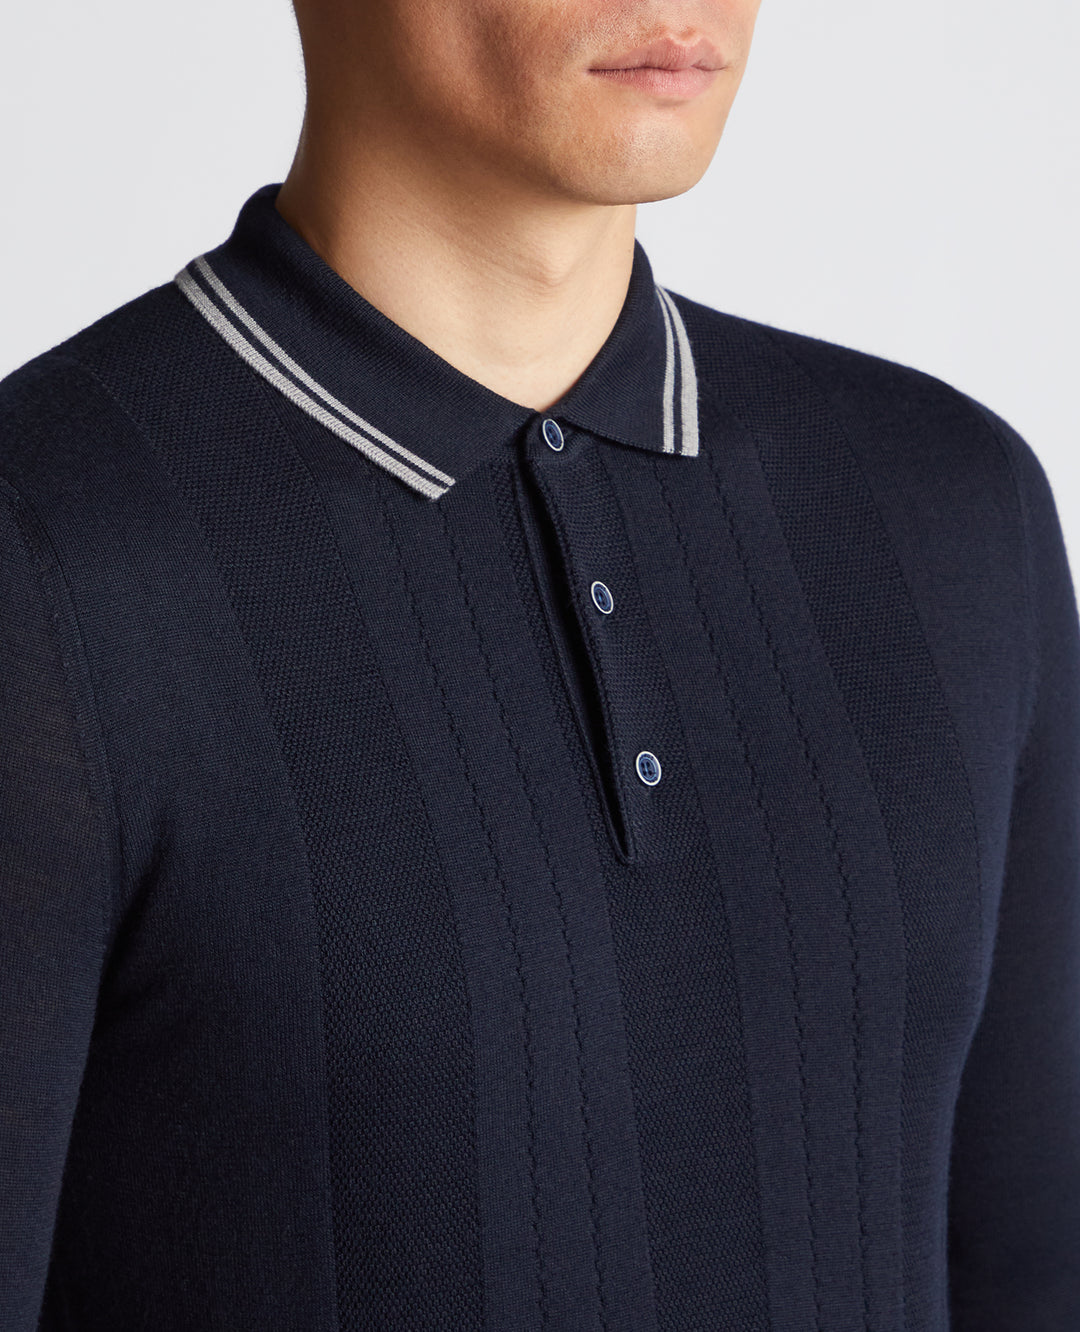 REMUS UOMO LS KNITTED POLO - NAVY